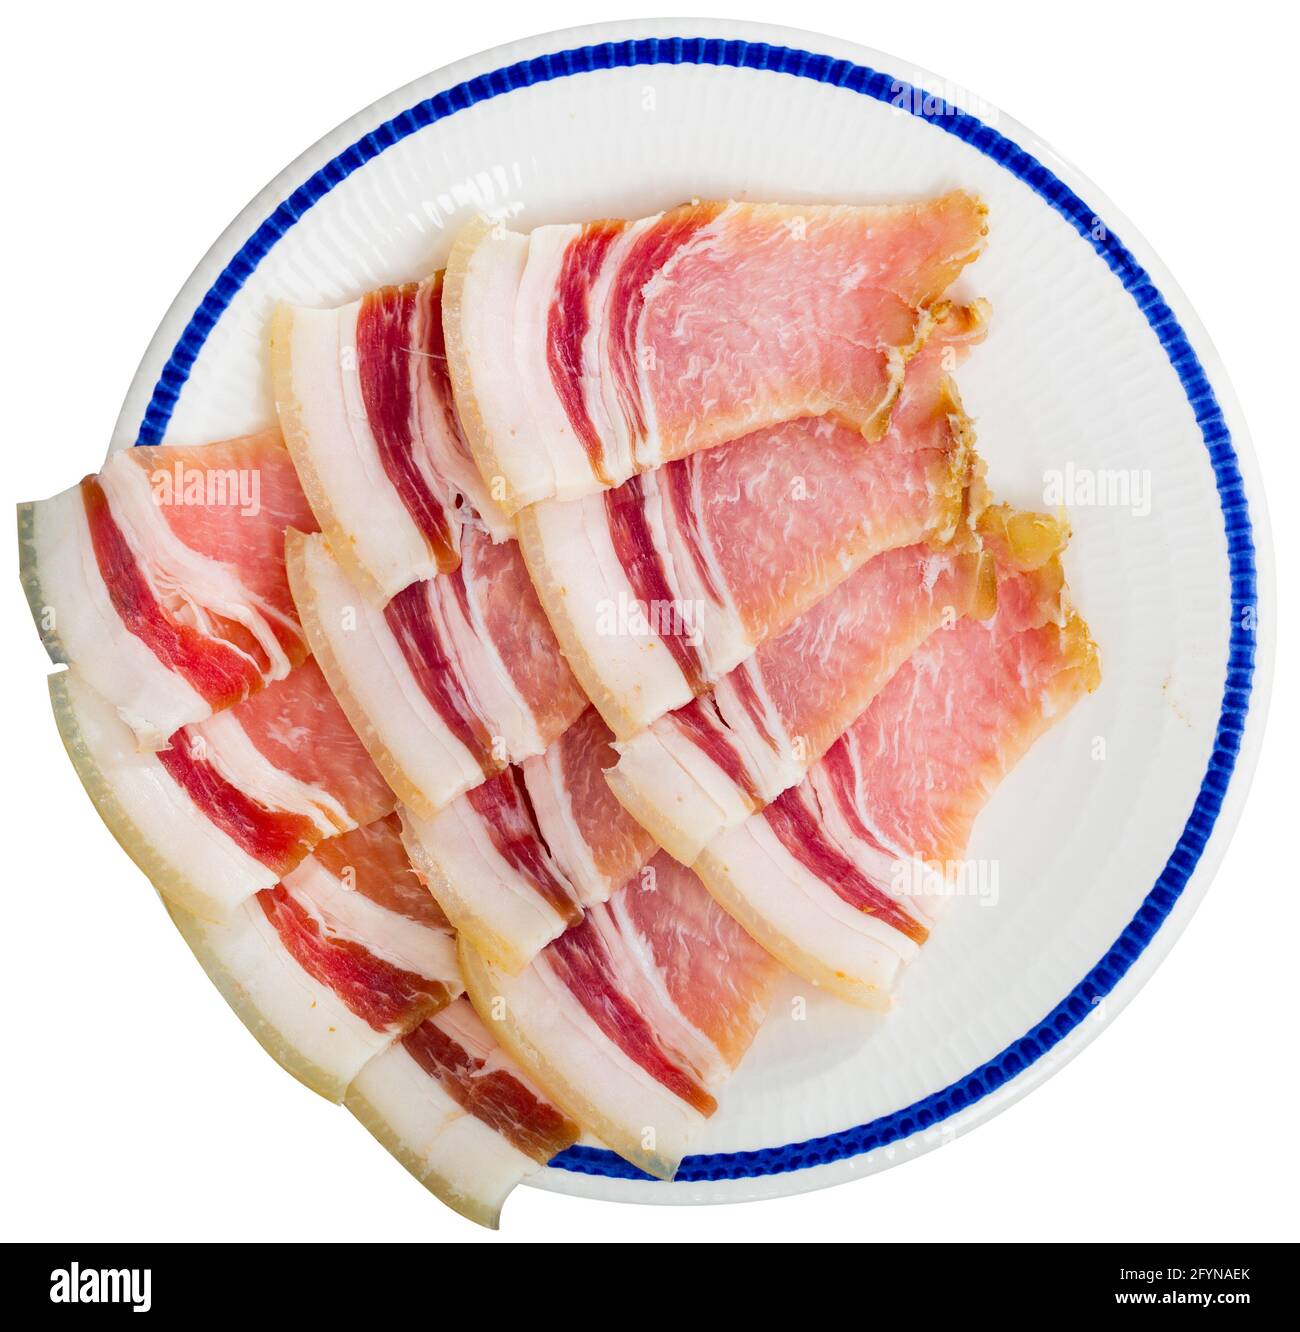 Appetizing jucy slices of fresh sliced bacon on a platter. Isolated over white background Stock Photo